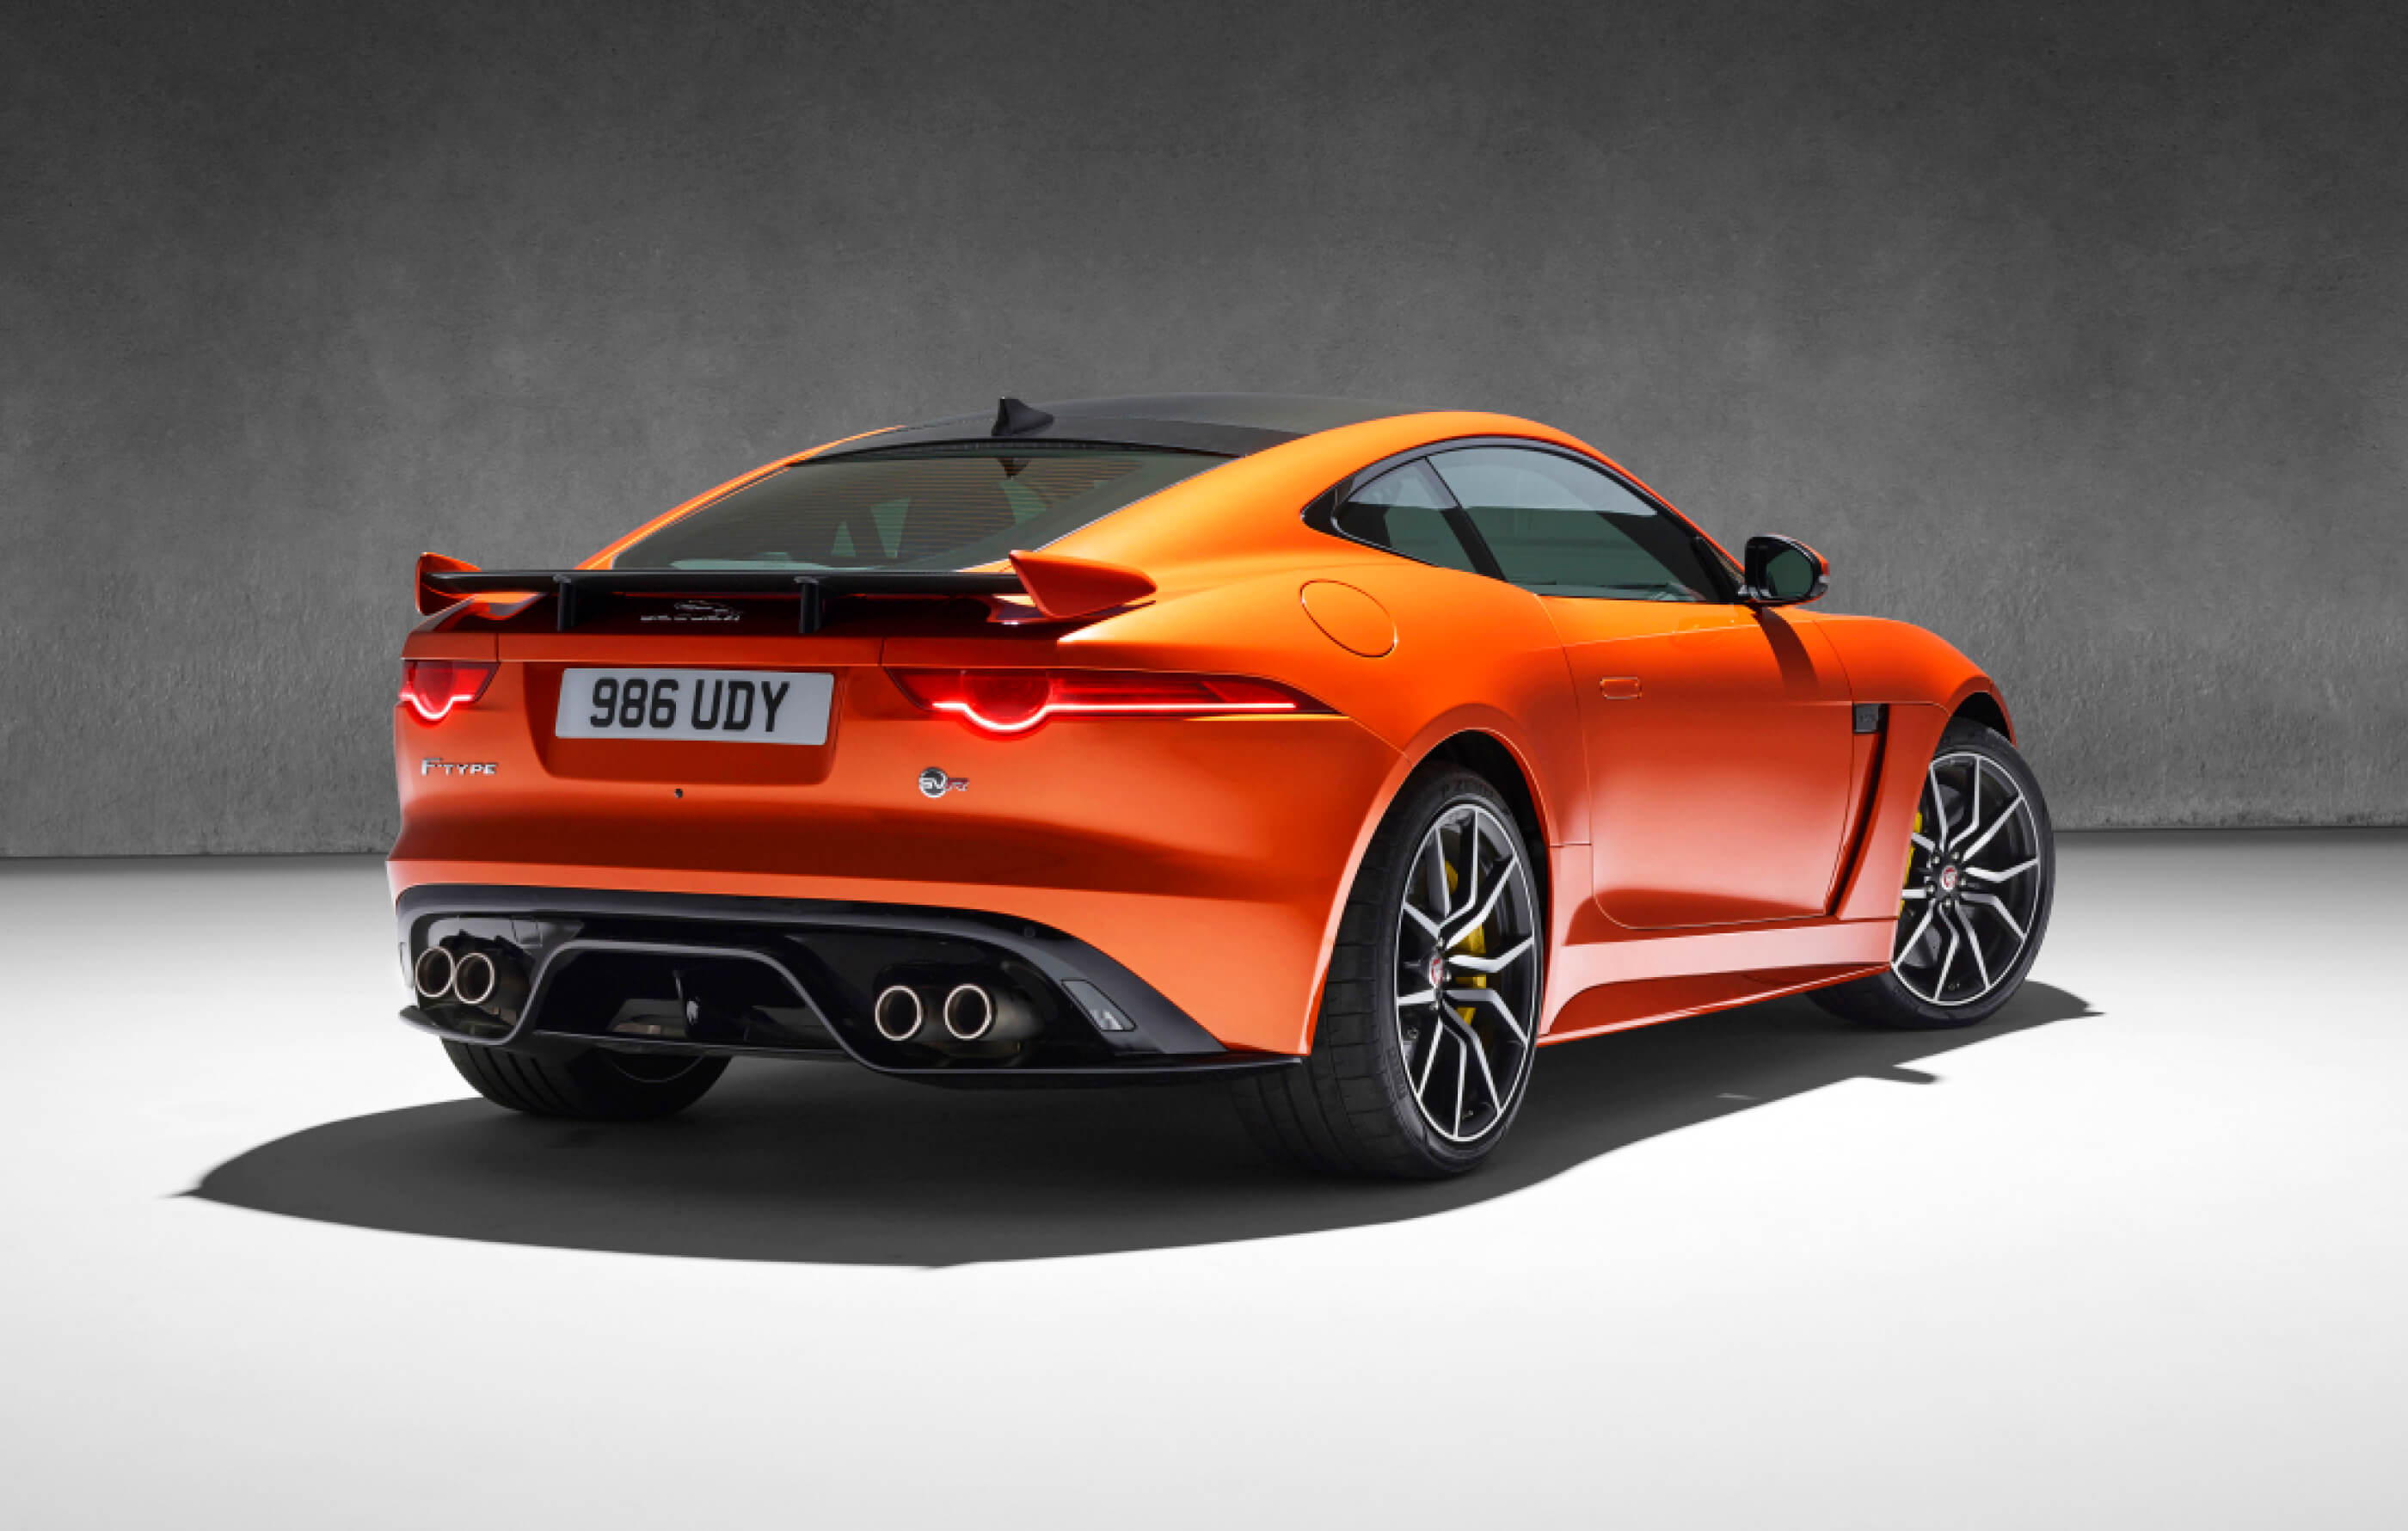 Full screen image of an orange Jaguar F-Type SVR, with tan leather interior on an industrial charcoal background